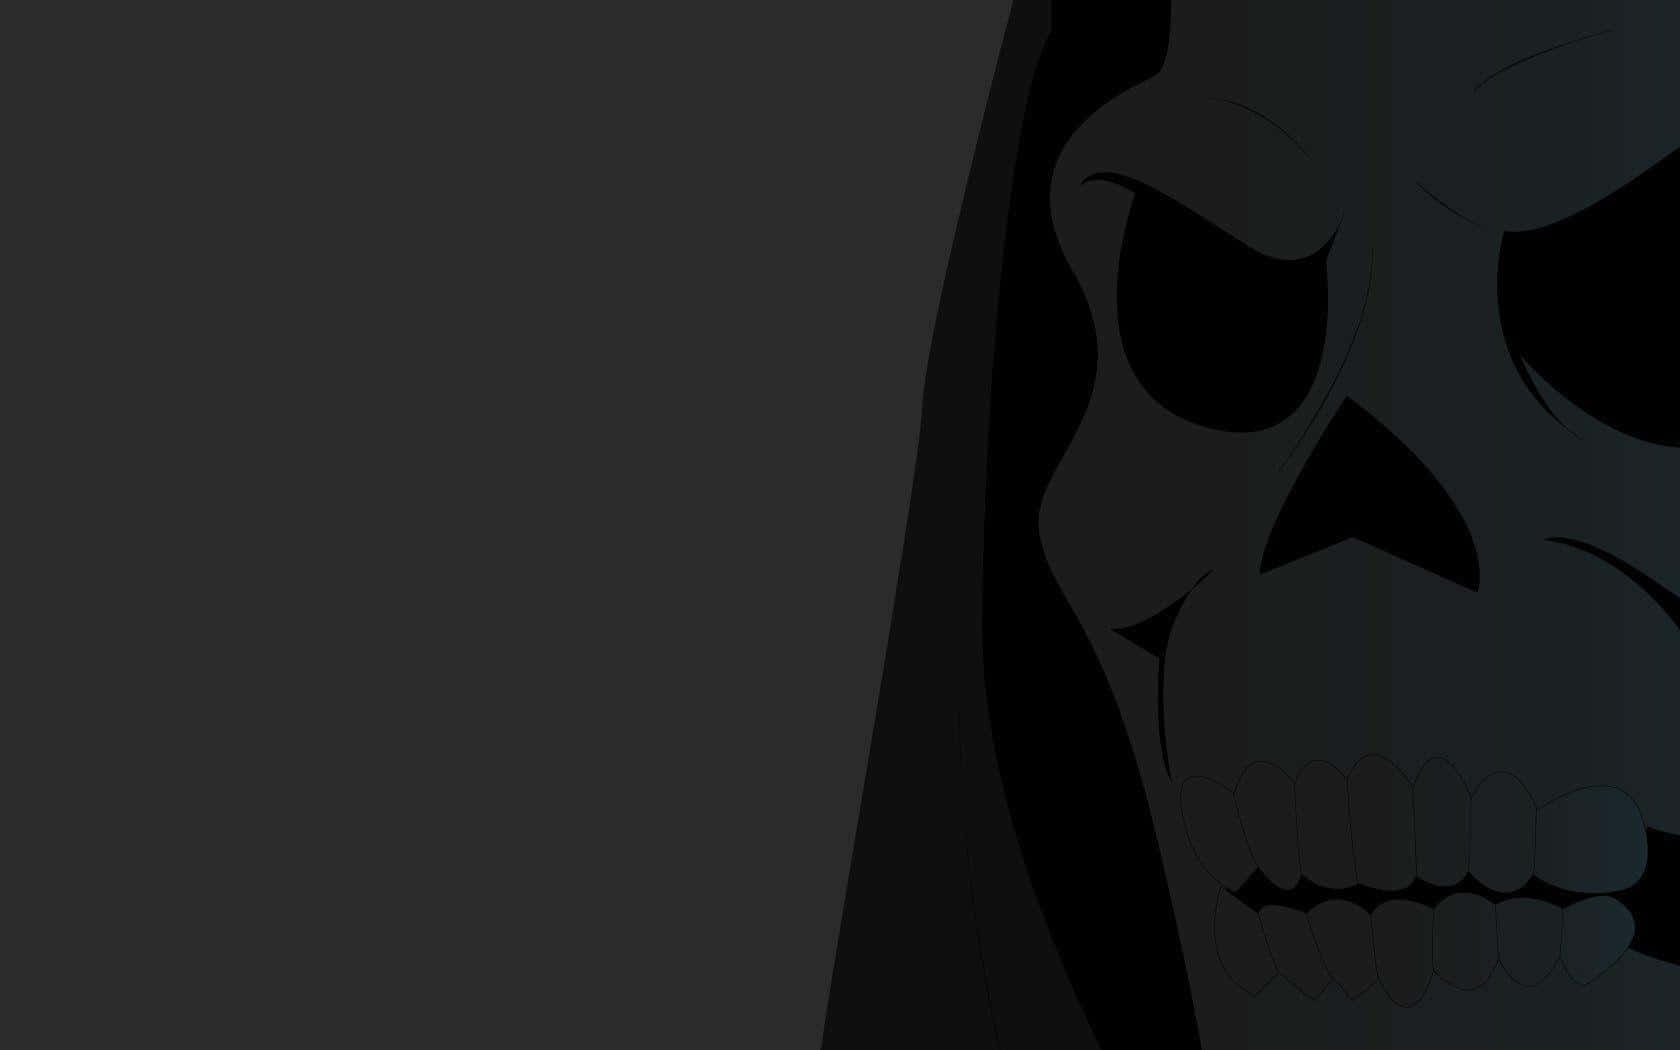 A Skull With A Hood Is Shown On A Black Background Background